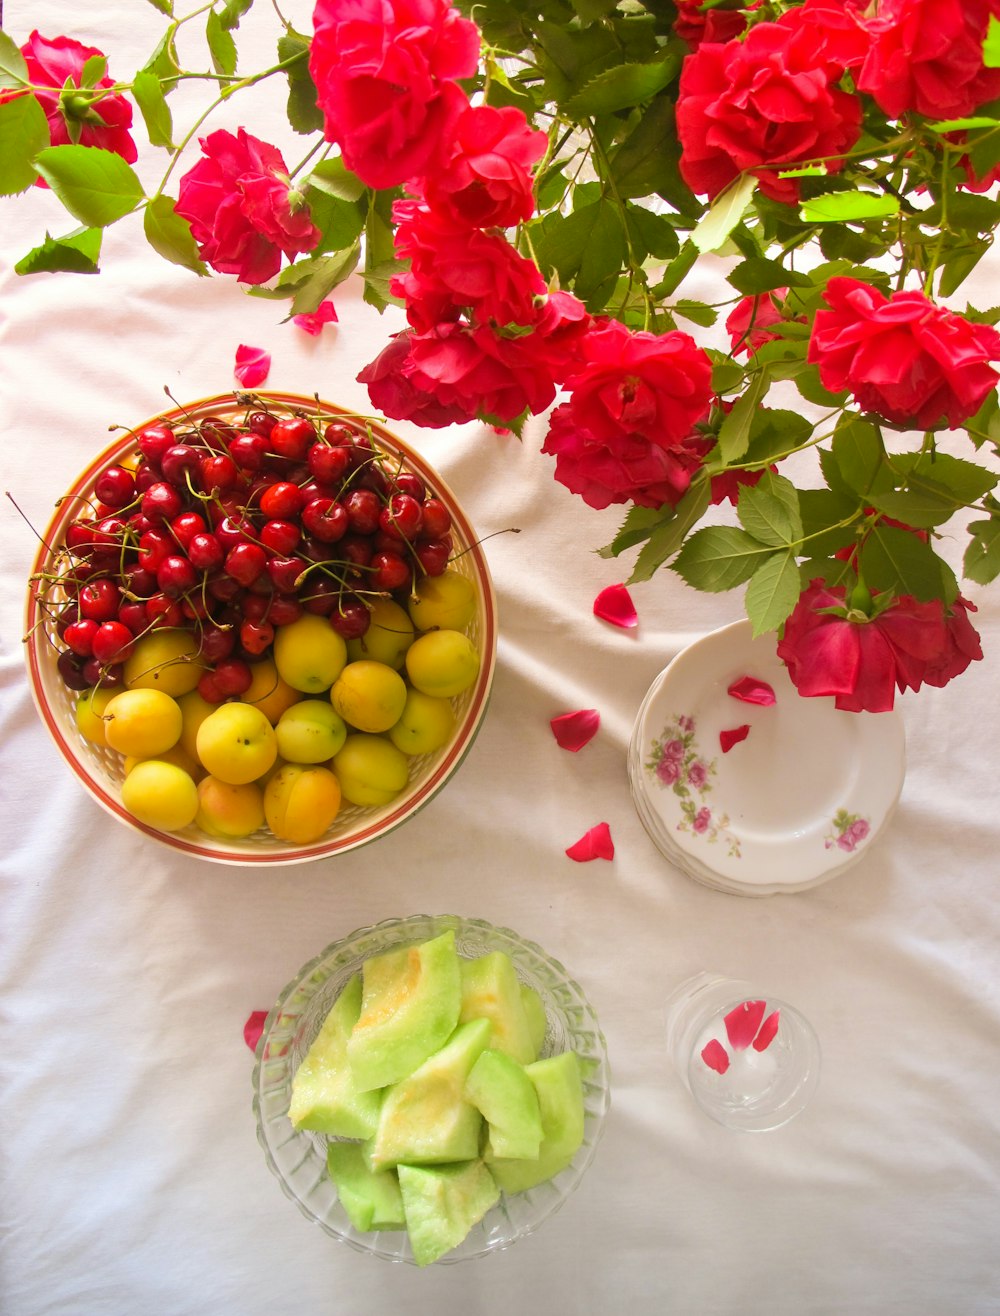 red and green grapes on clear glass bowl